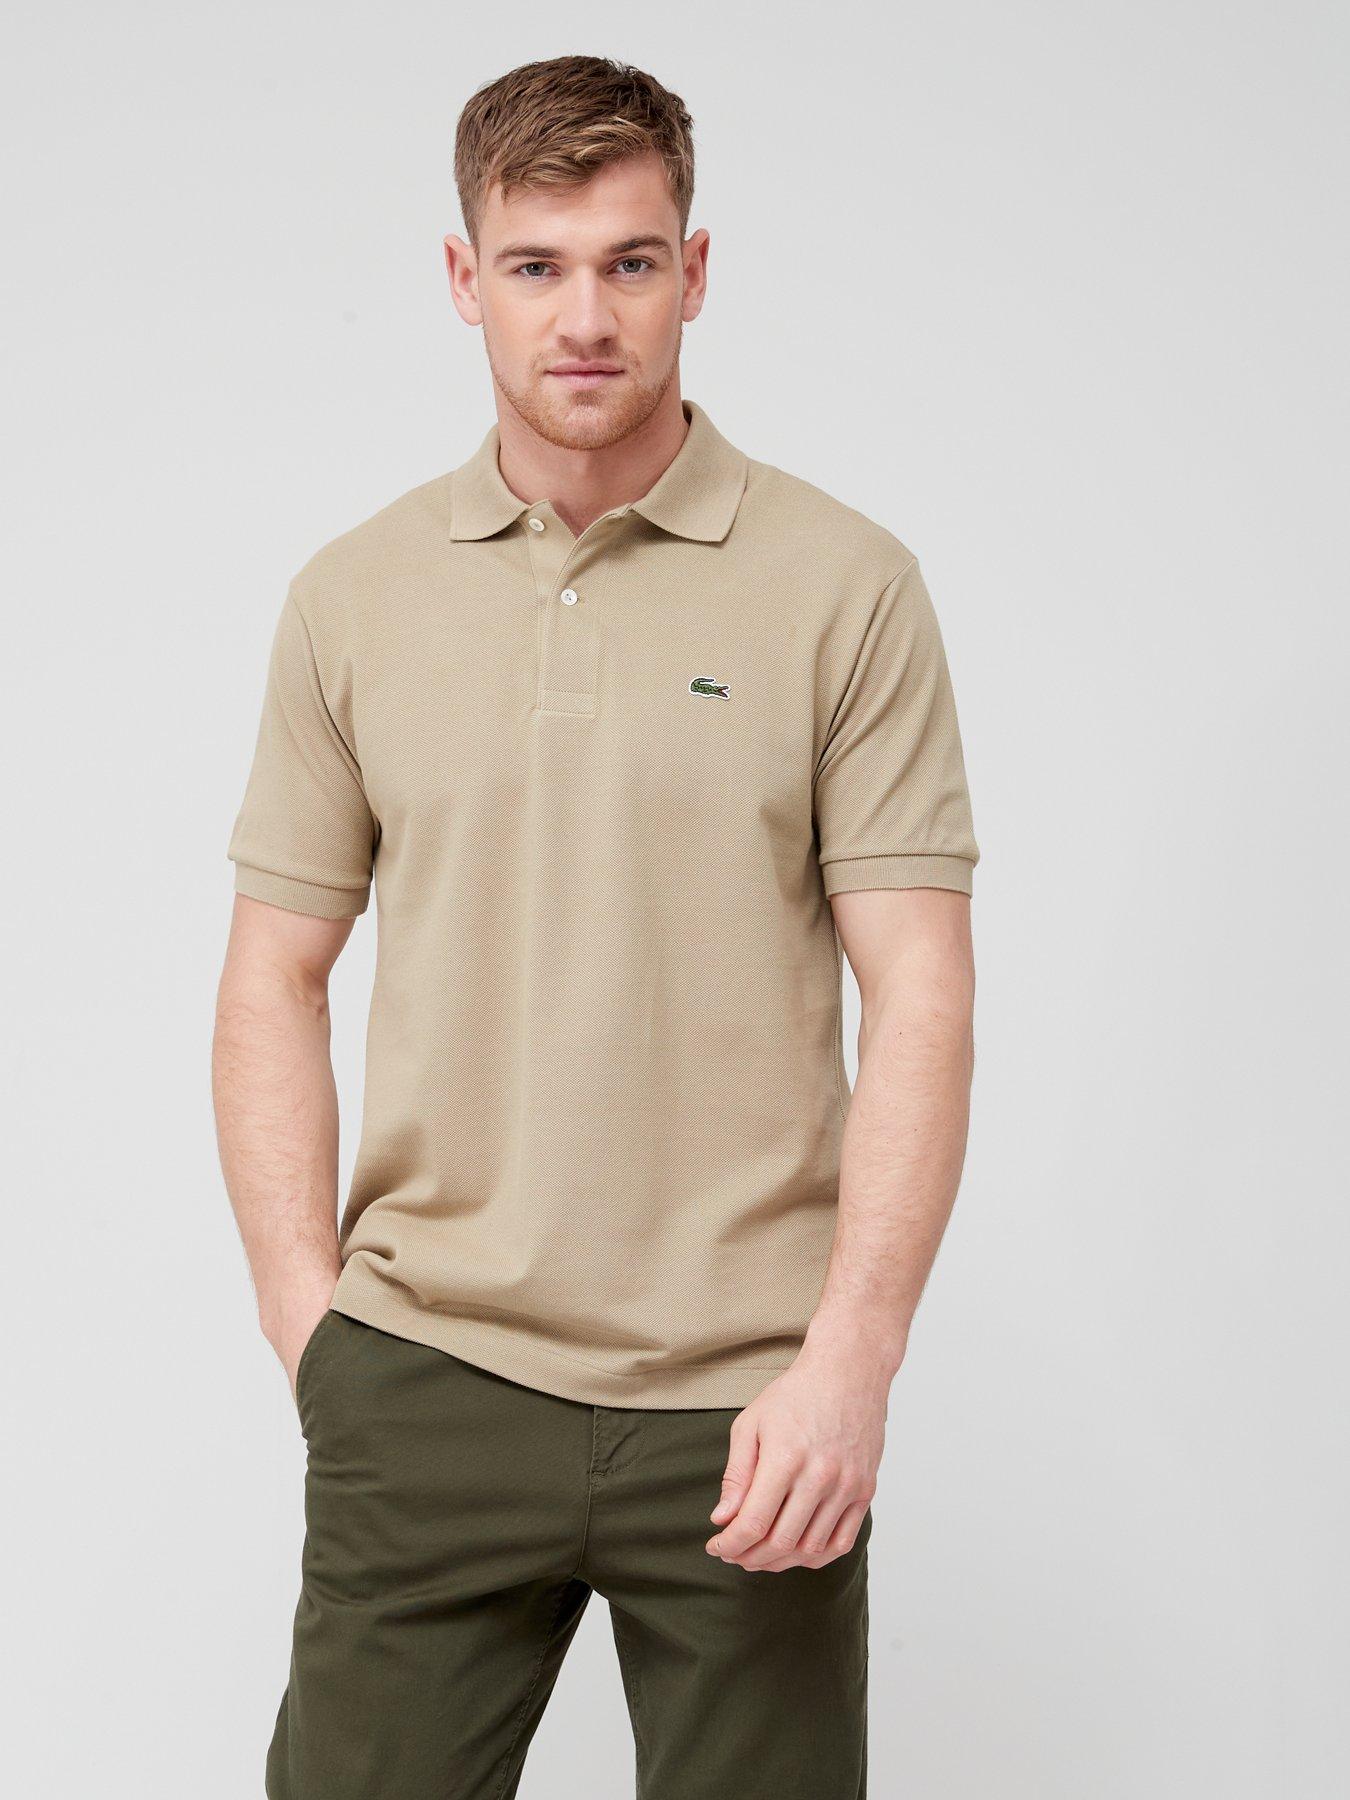 Lacoste Classic L.12.12 Pique Polo Shirt - Brown | very.co.uk